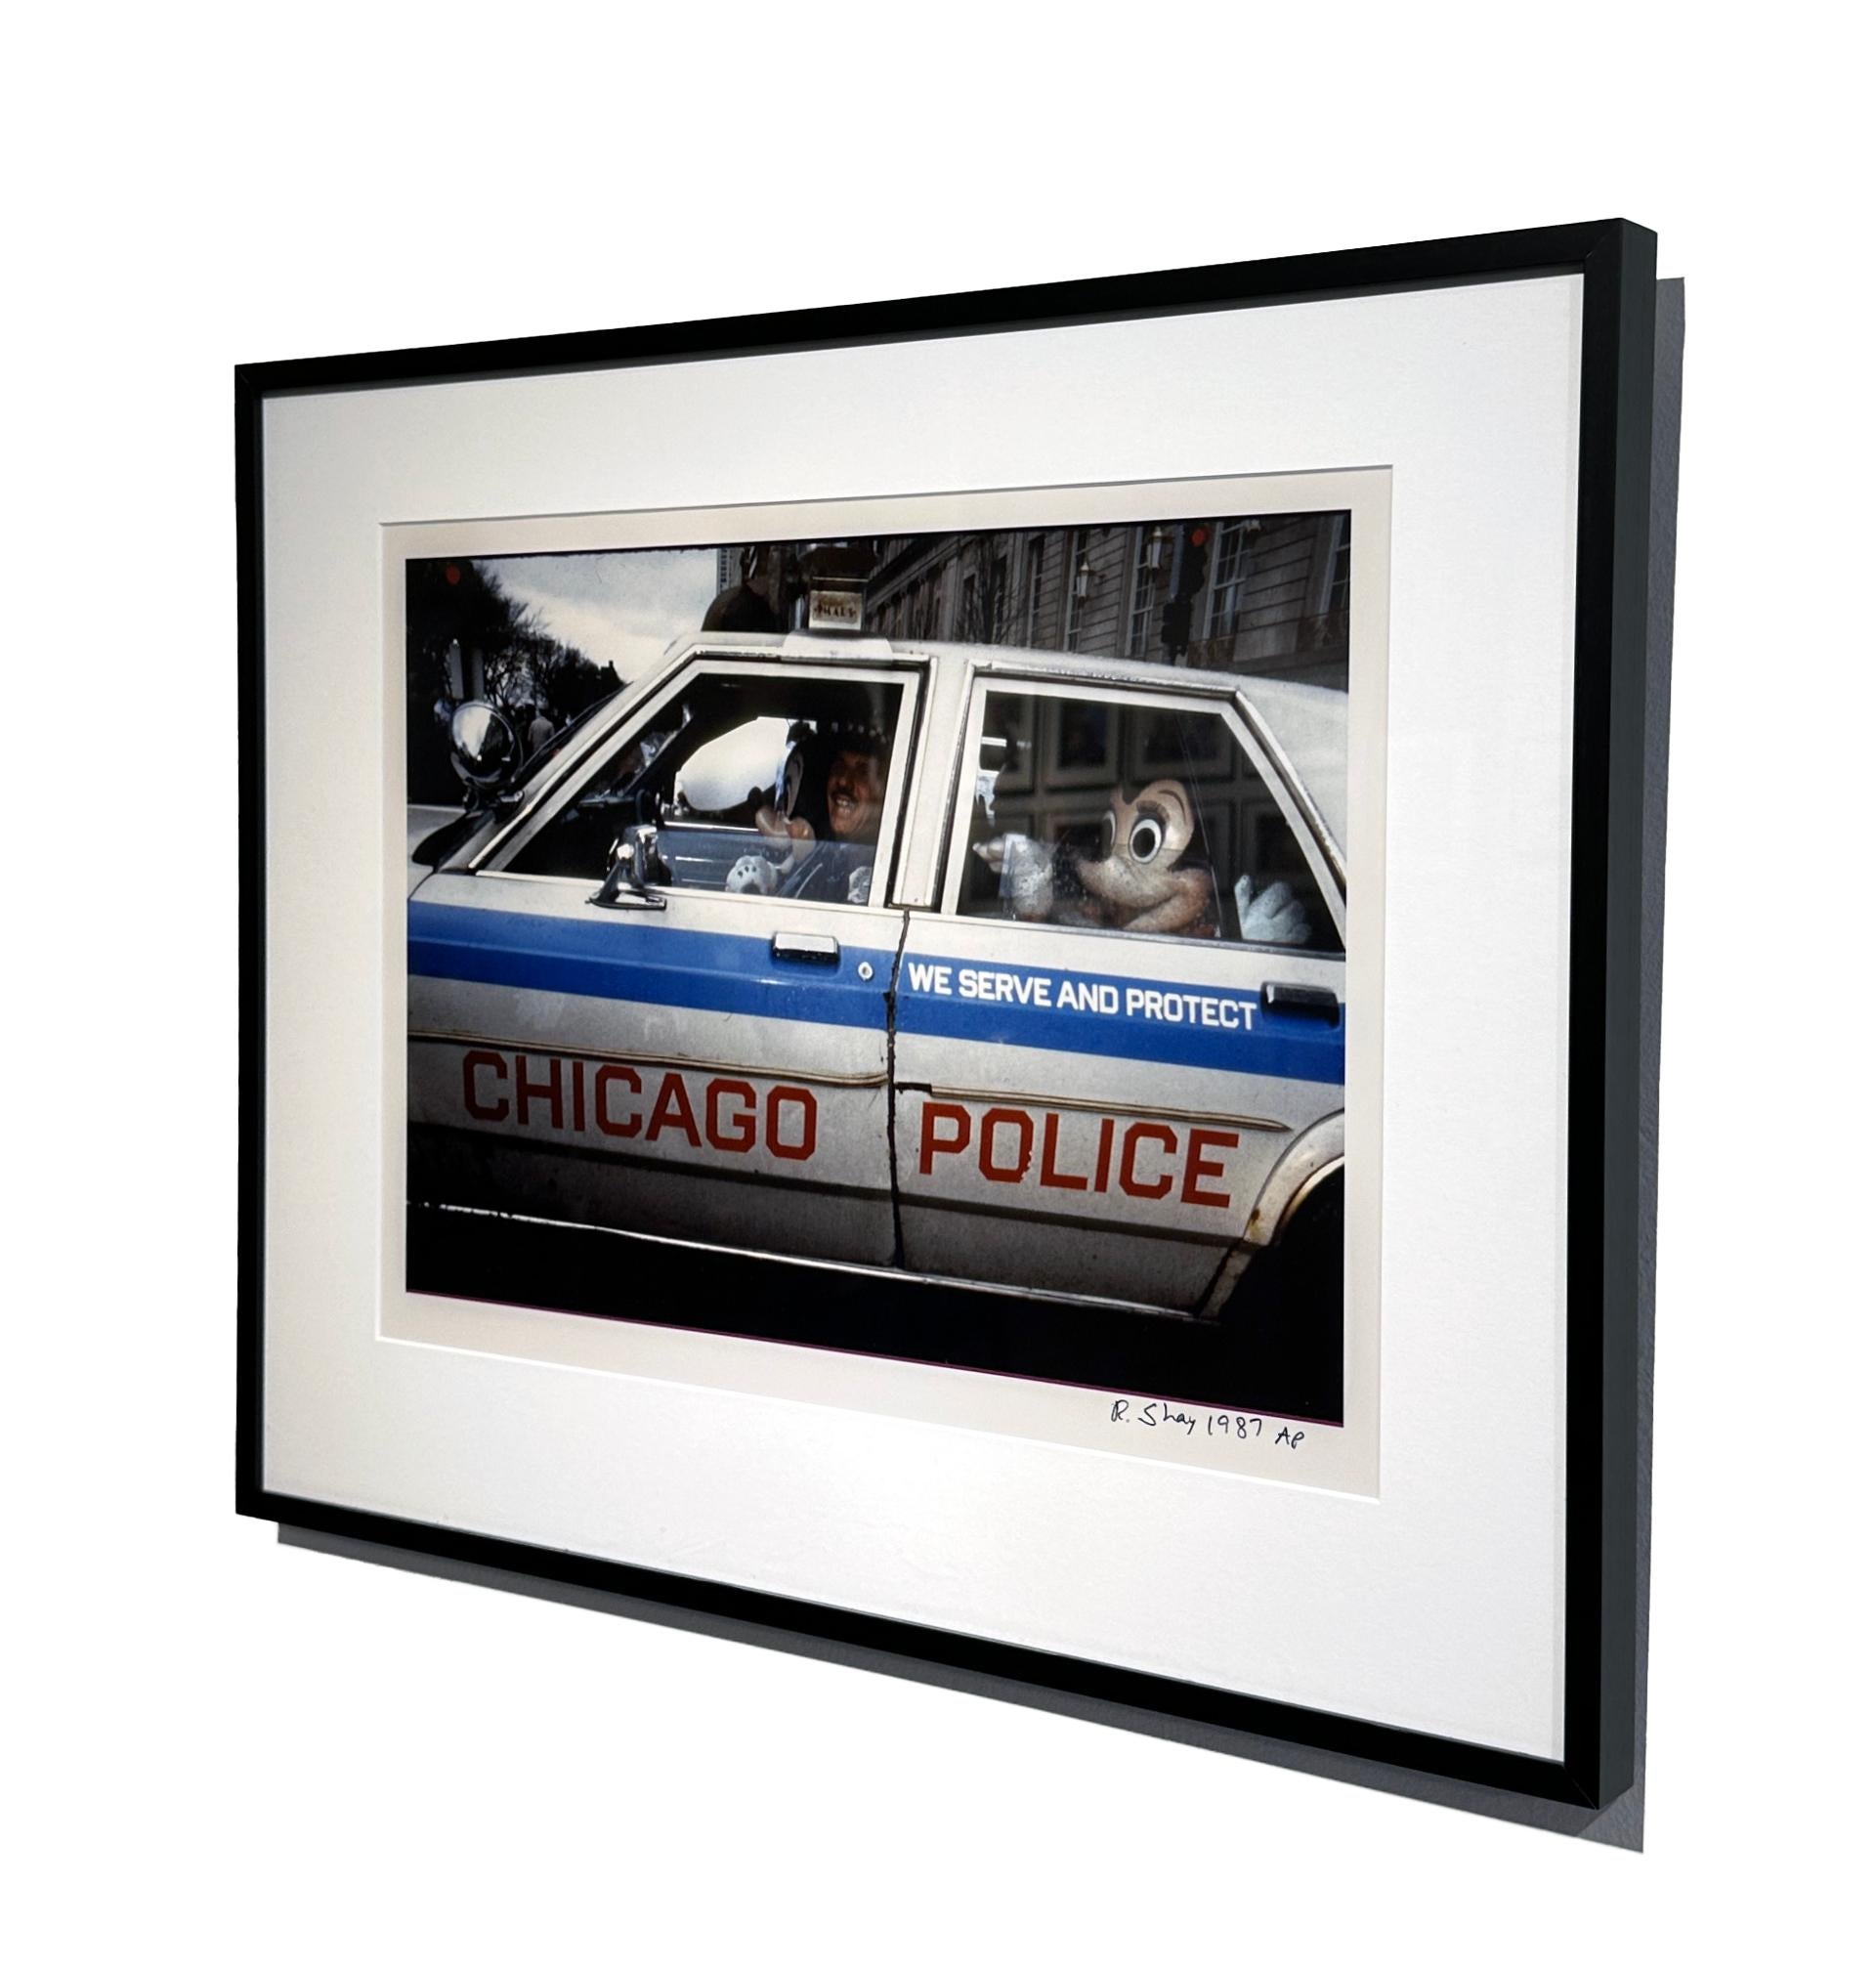 Something not seen every day is Minnie Mouse in the back of a police car!  And with a closer look, Mickey Mouse is in the front seat.  Richard Shay captured this image in 1987 in downtown Chicago. This Artist Proof is matted and framed in a simple